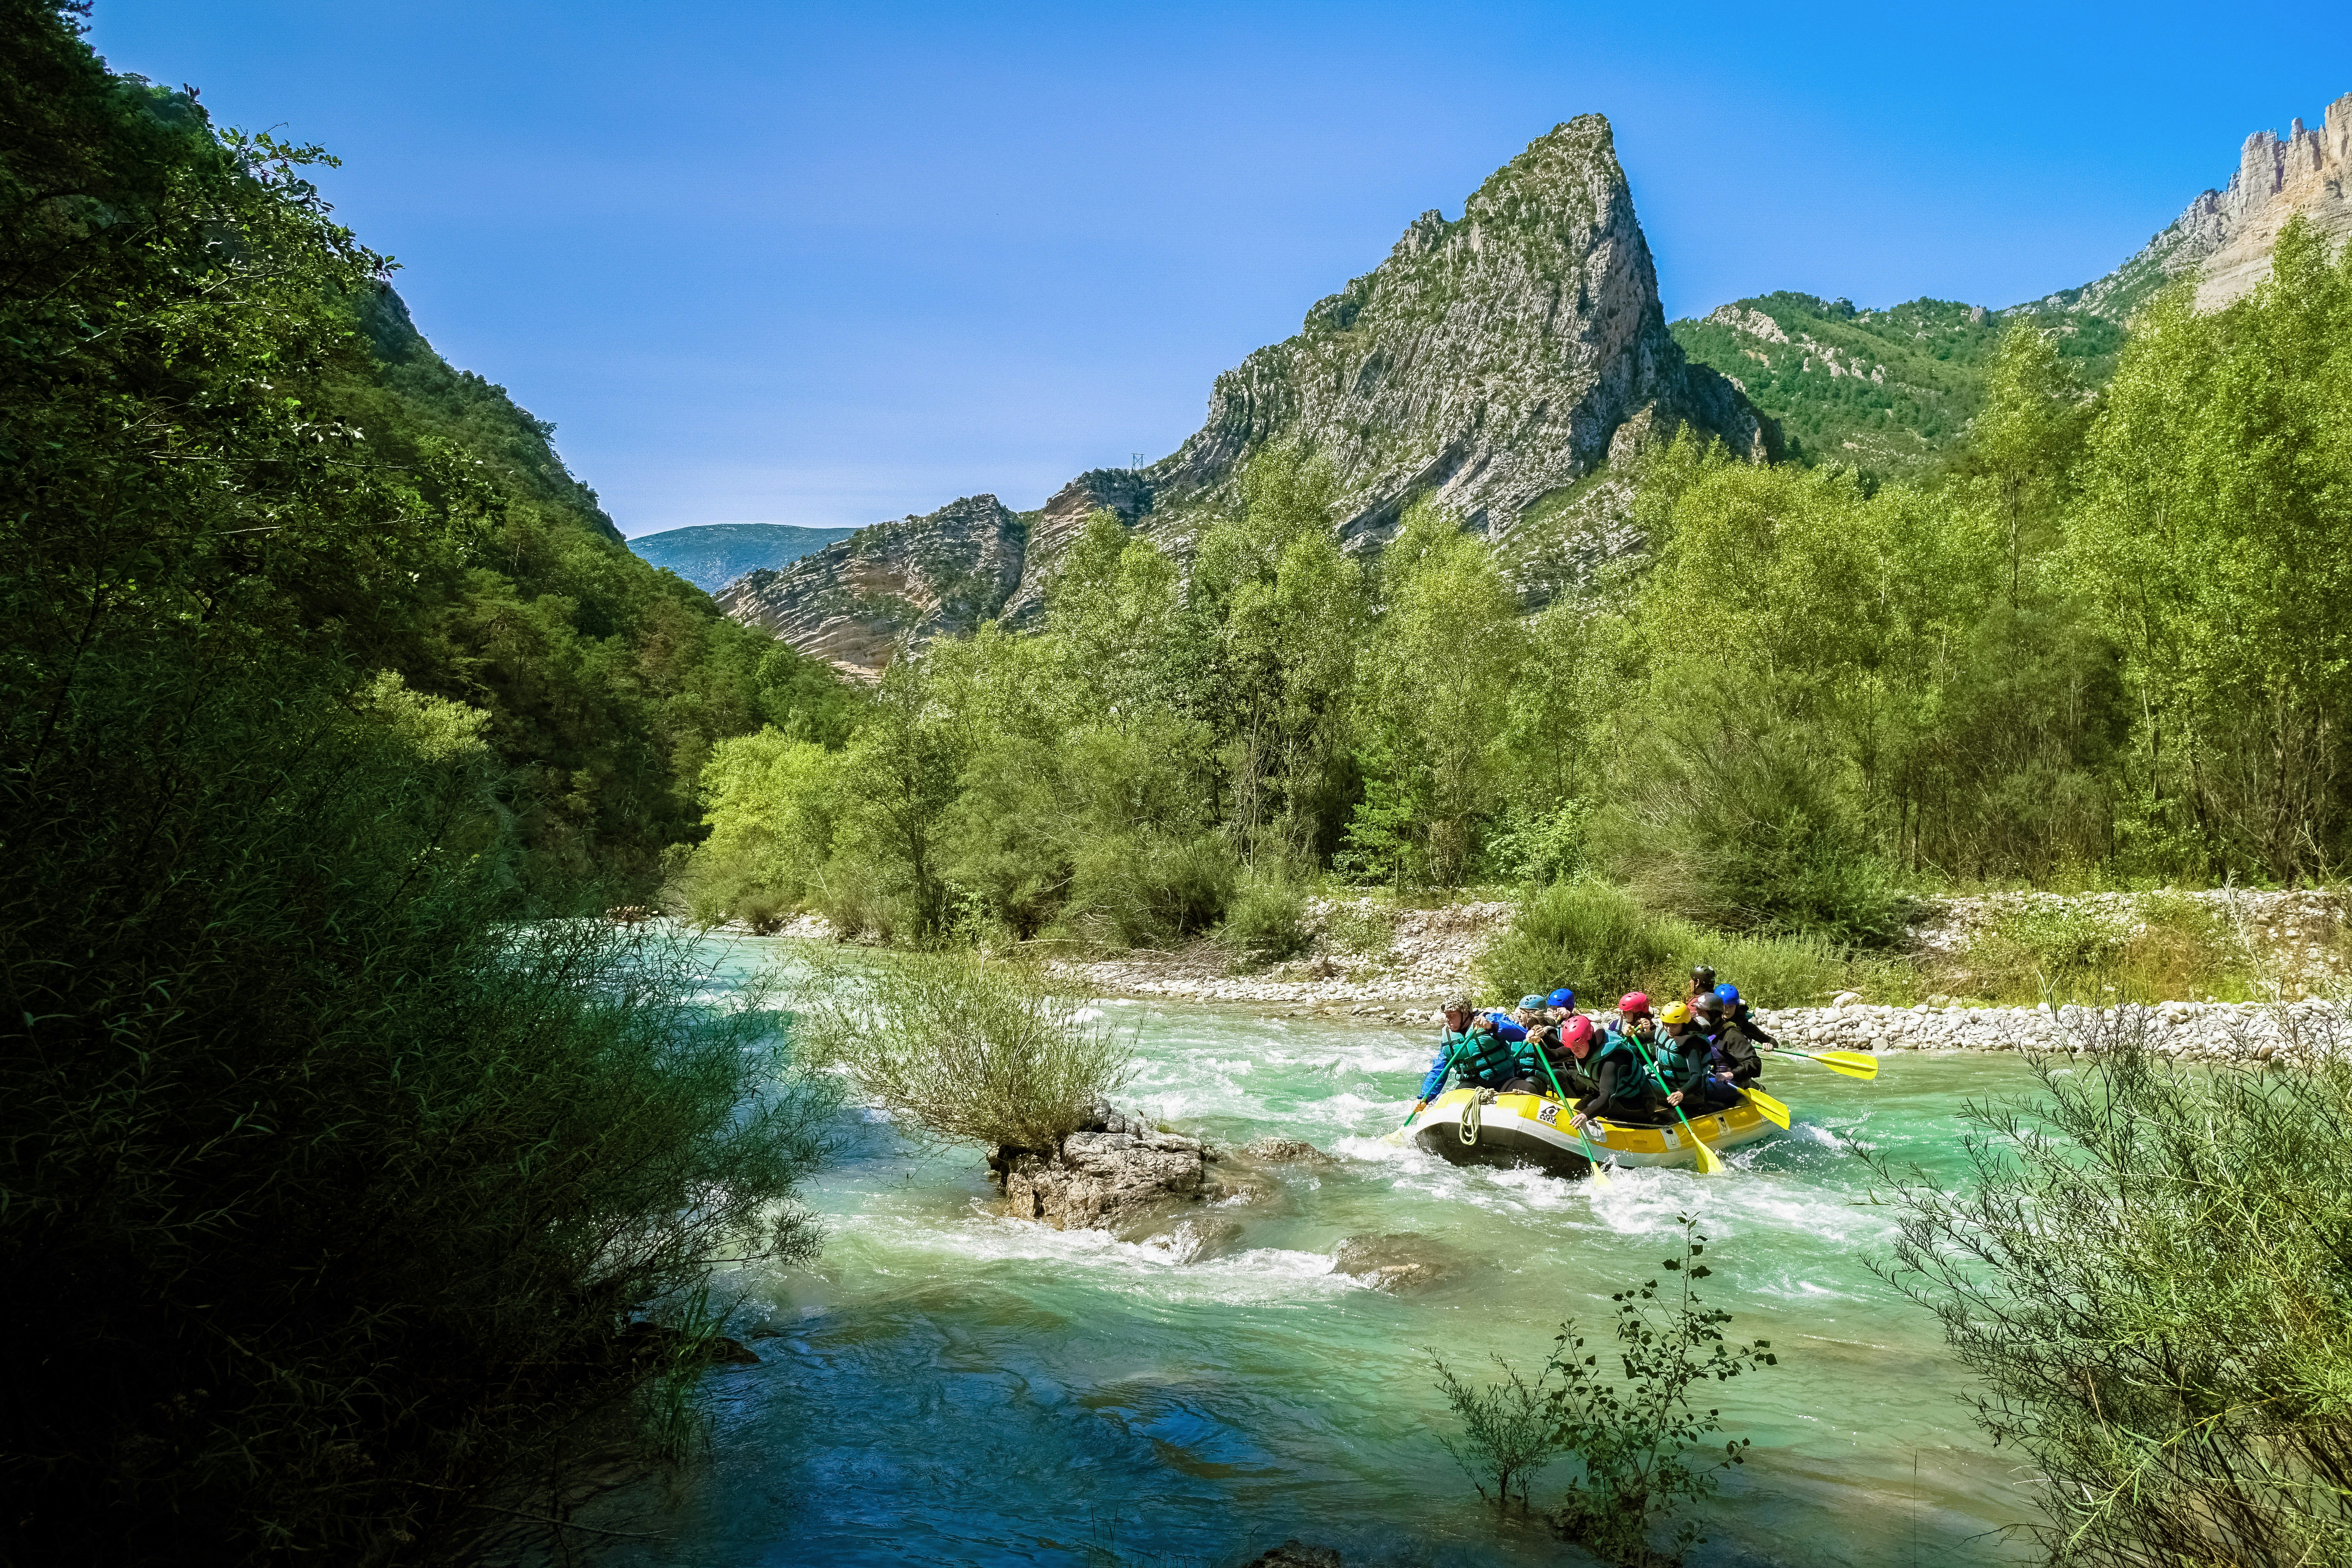 people riding on yellow kayak on river near green trees and mountain during daytime